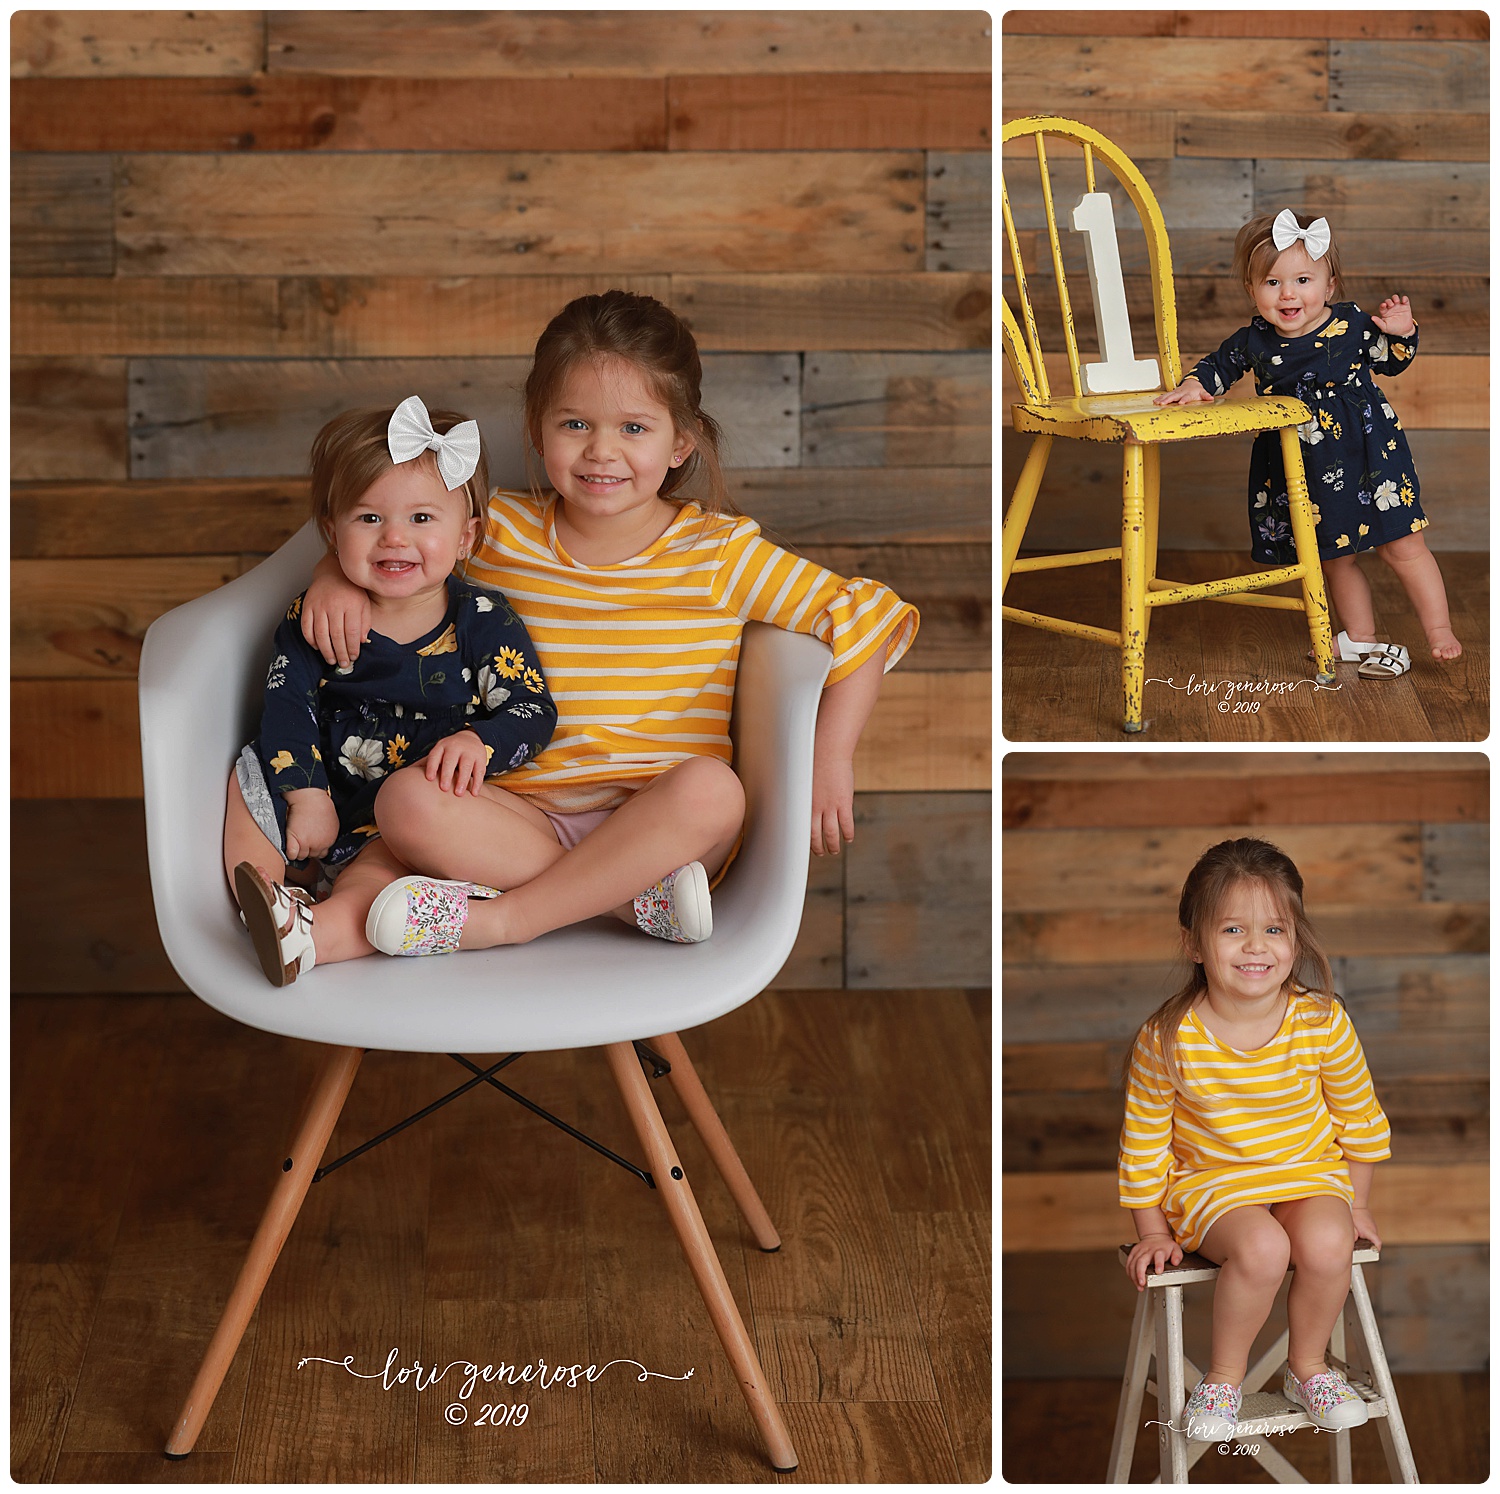 Sisters Dawsyn (turning one) and Emerson! Love the pop of yellow 